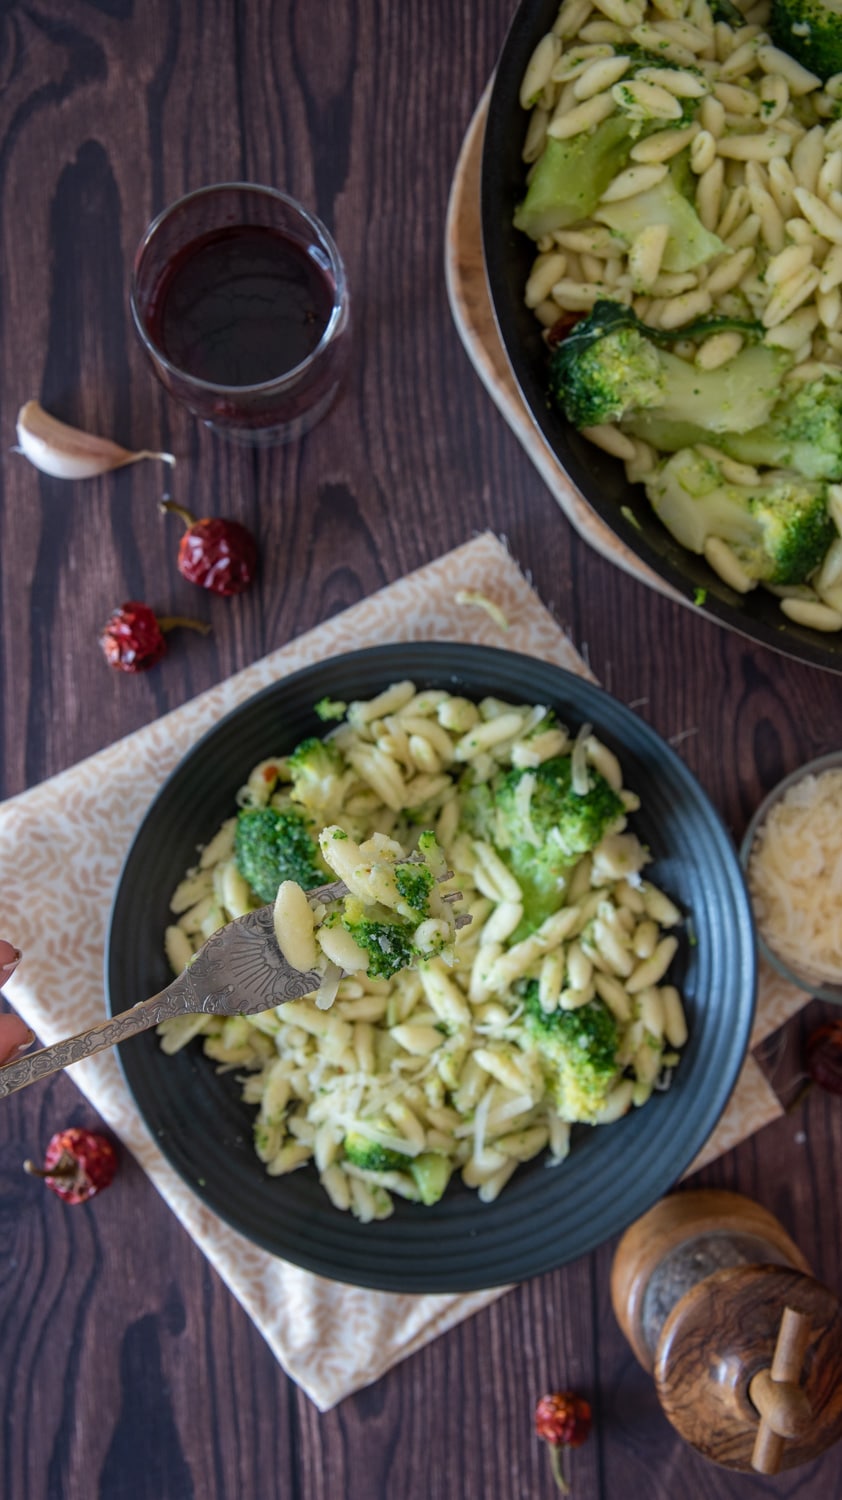 Cavatelli and broccoli served on a dish and a fork lifting a bite